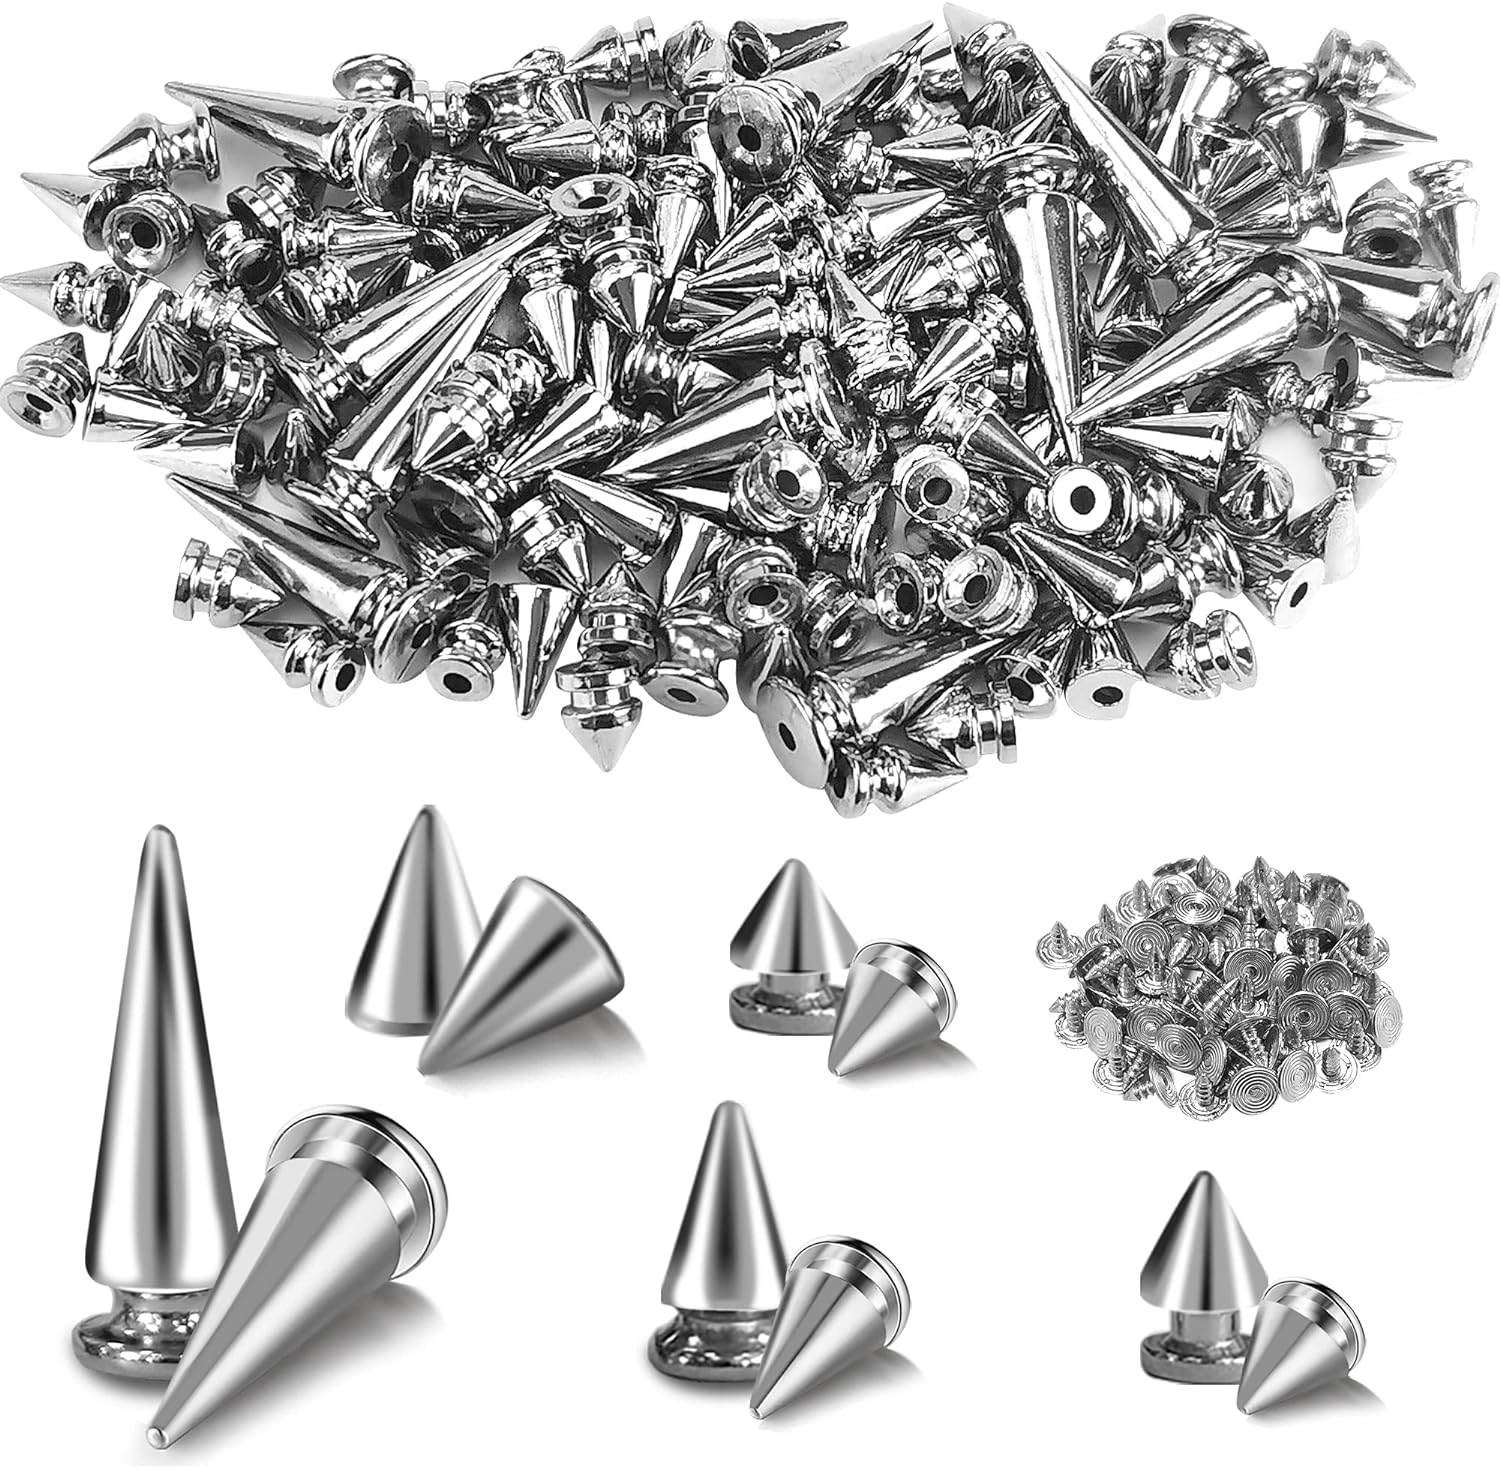 200 Sets 9.5mm Spikes for Clothing, Studs and Spikes for Crafts, Metal and Silver Cone Spikes, Punk Spikes with Storage Box by MoHern